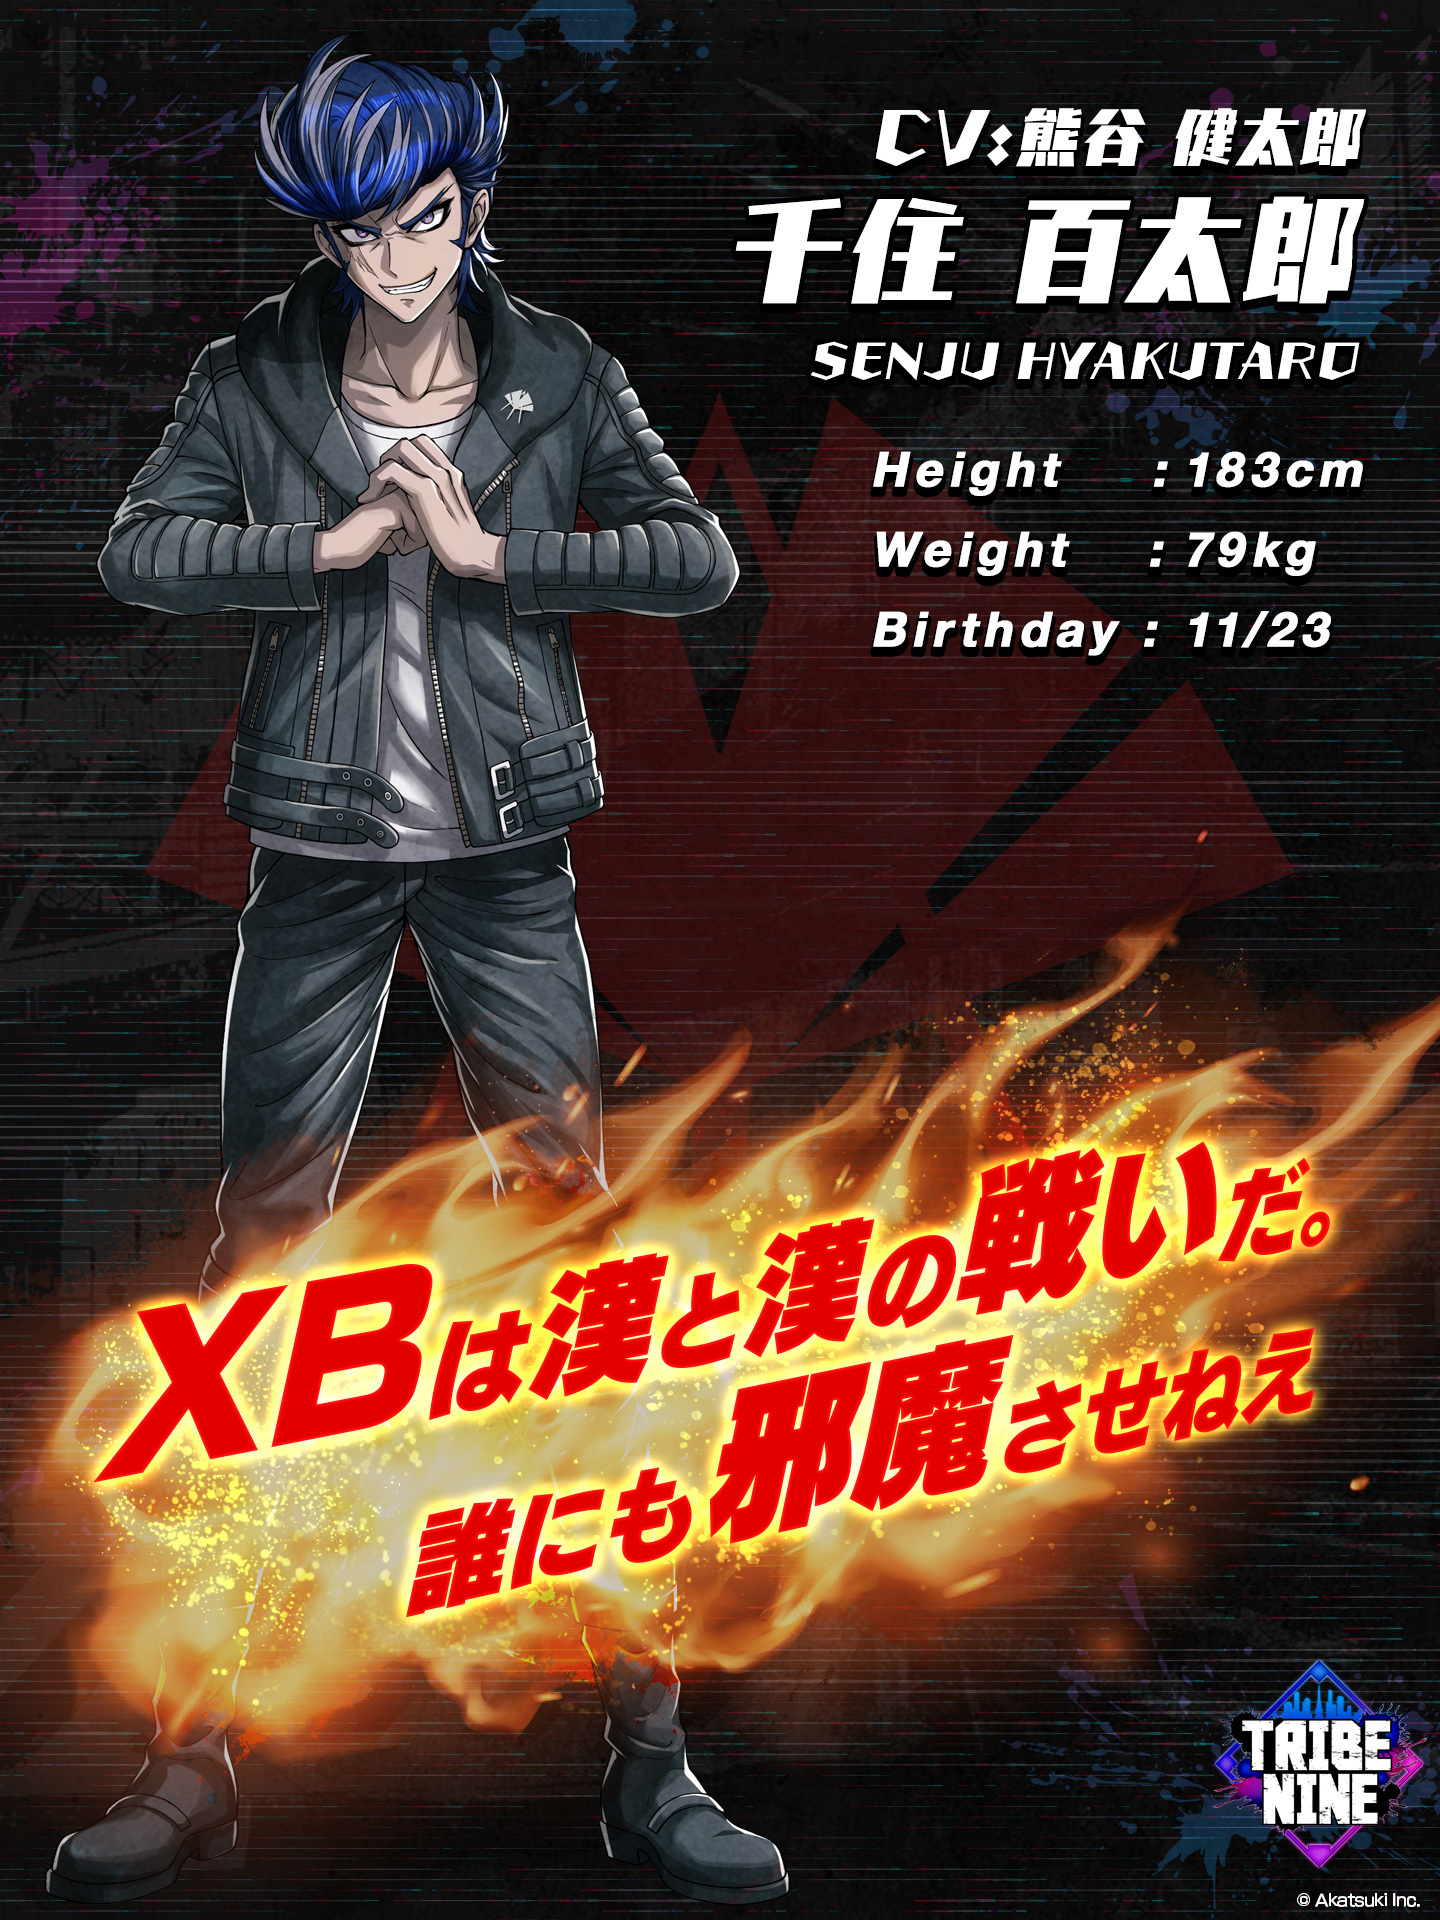 A character setting of Hyakutaro Senju from the upcoming Tribe Nine TV anime. Hyakutaro is a fierce looking young man with a pompadour haircut, and he wears a leather jacket and jeans.